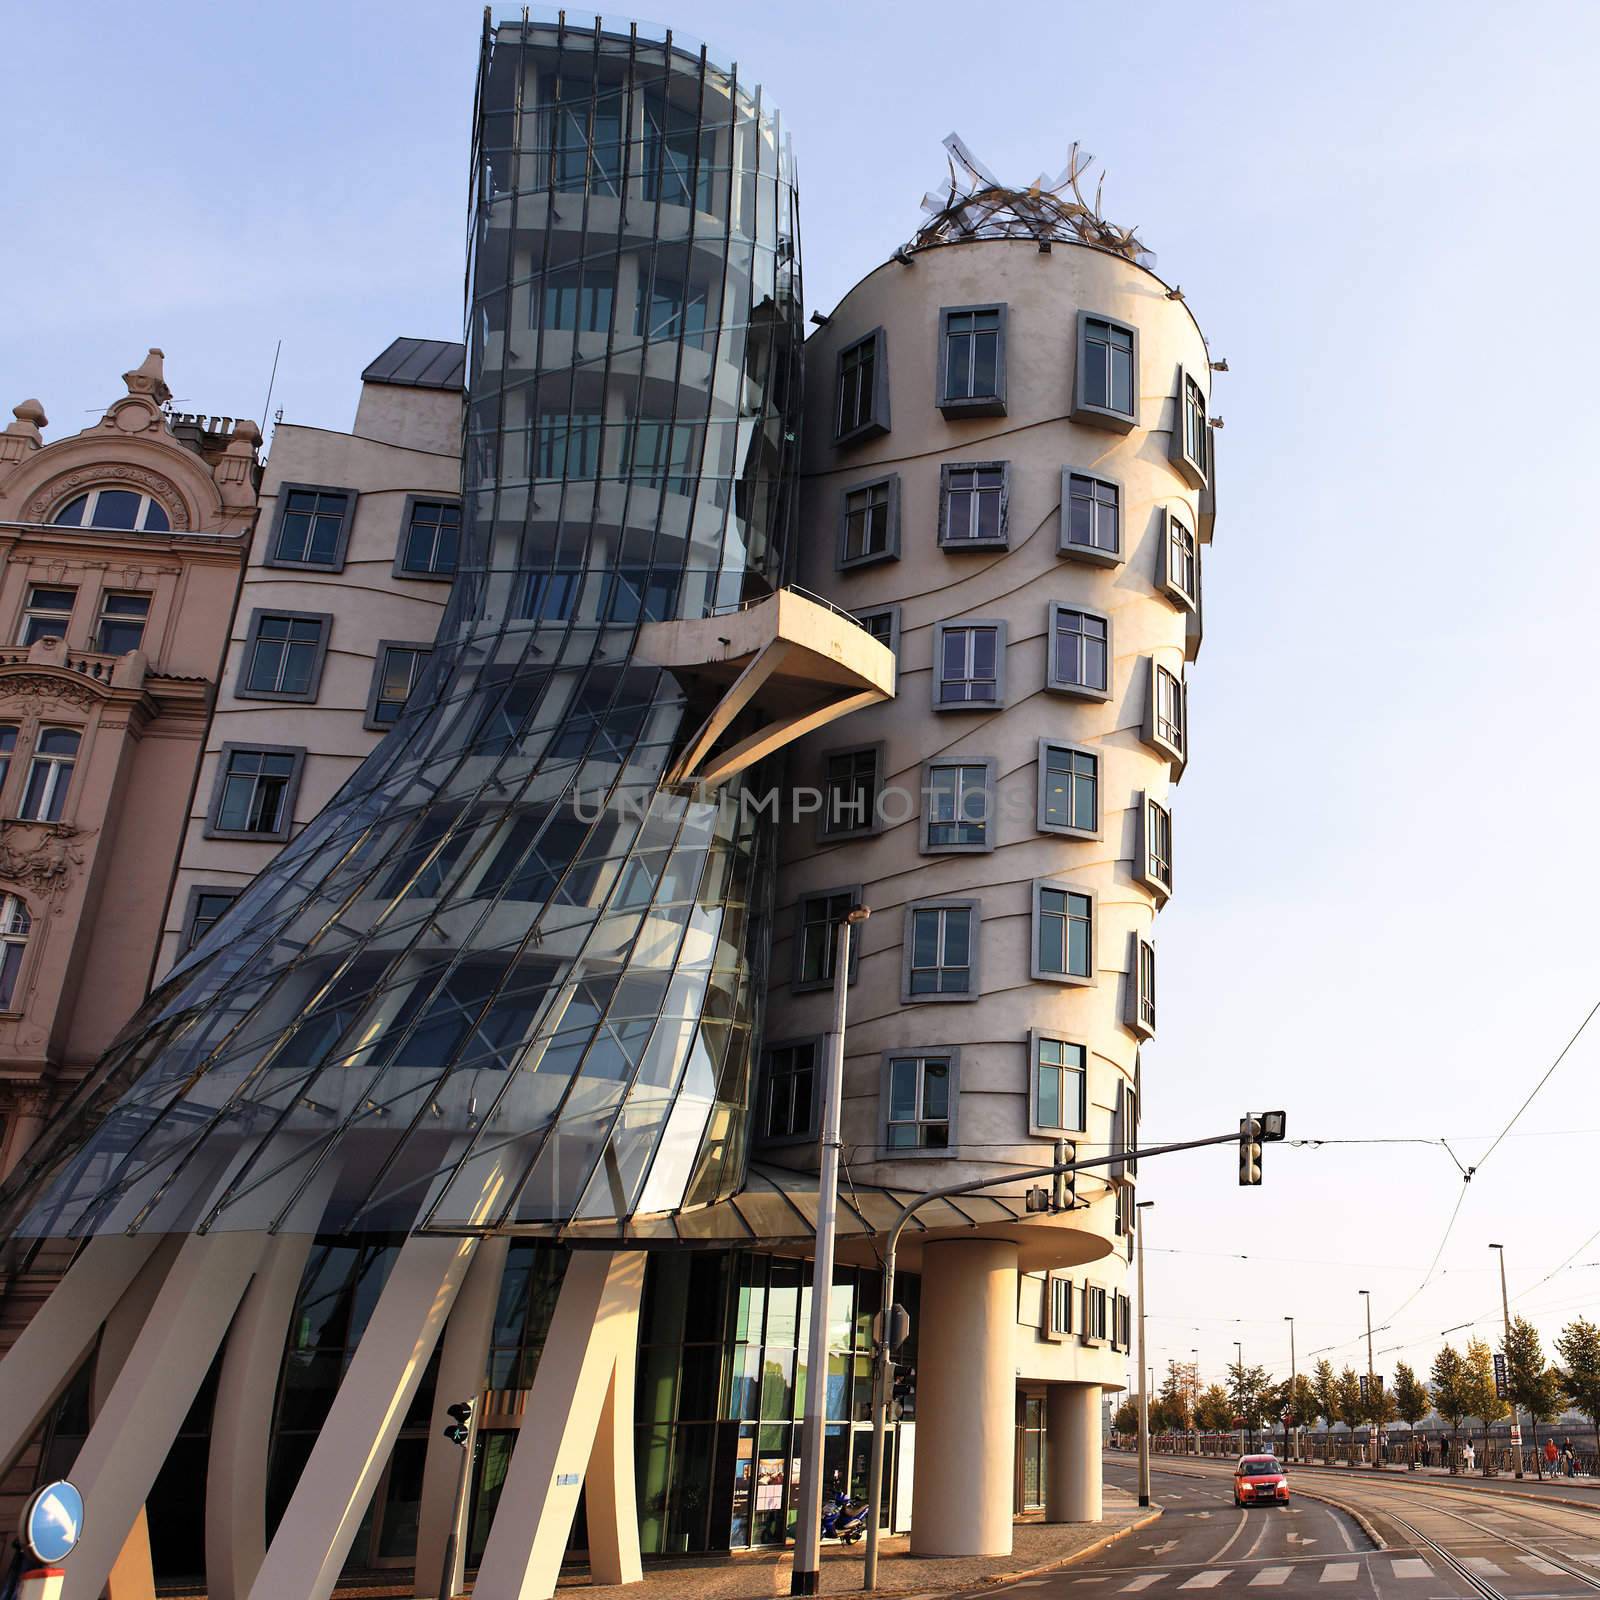 dancing house by vwalakte